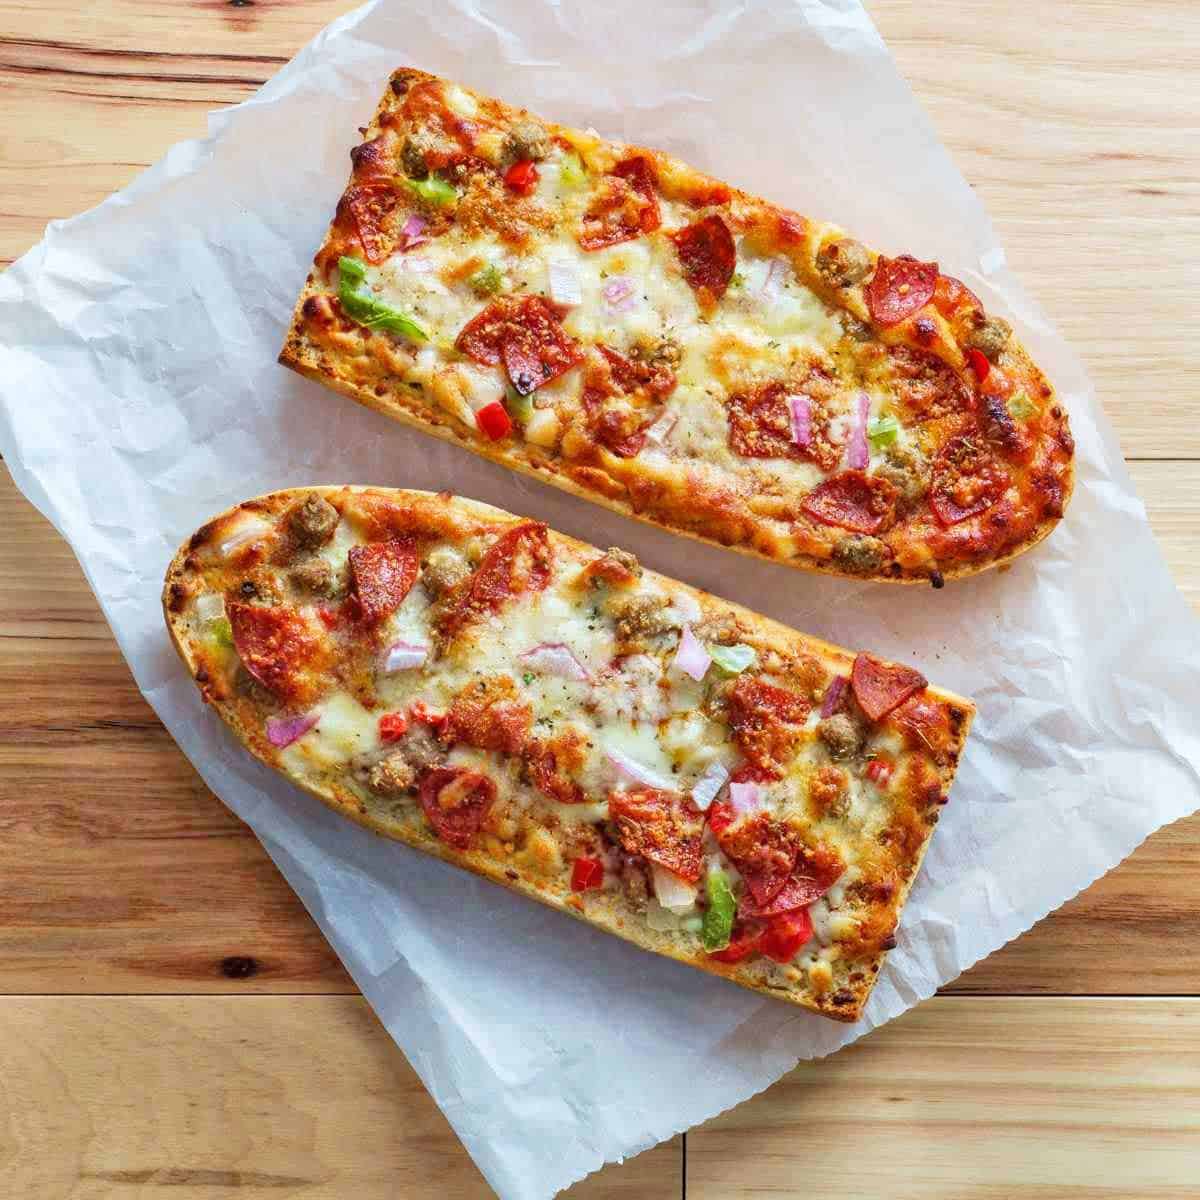 Two half loaves of French bread pizza with melted cheese and toppings.